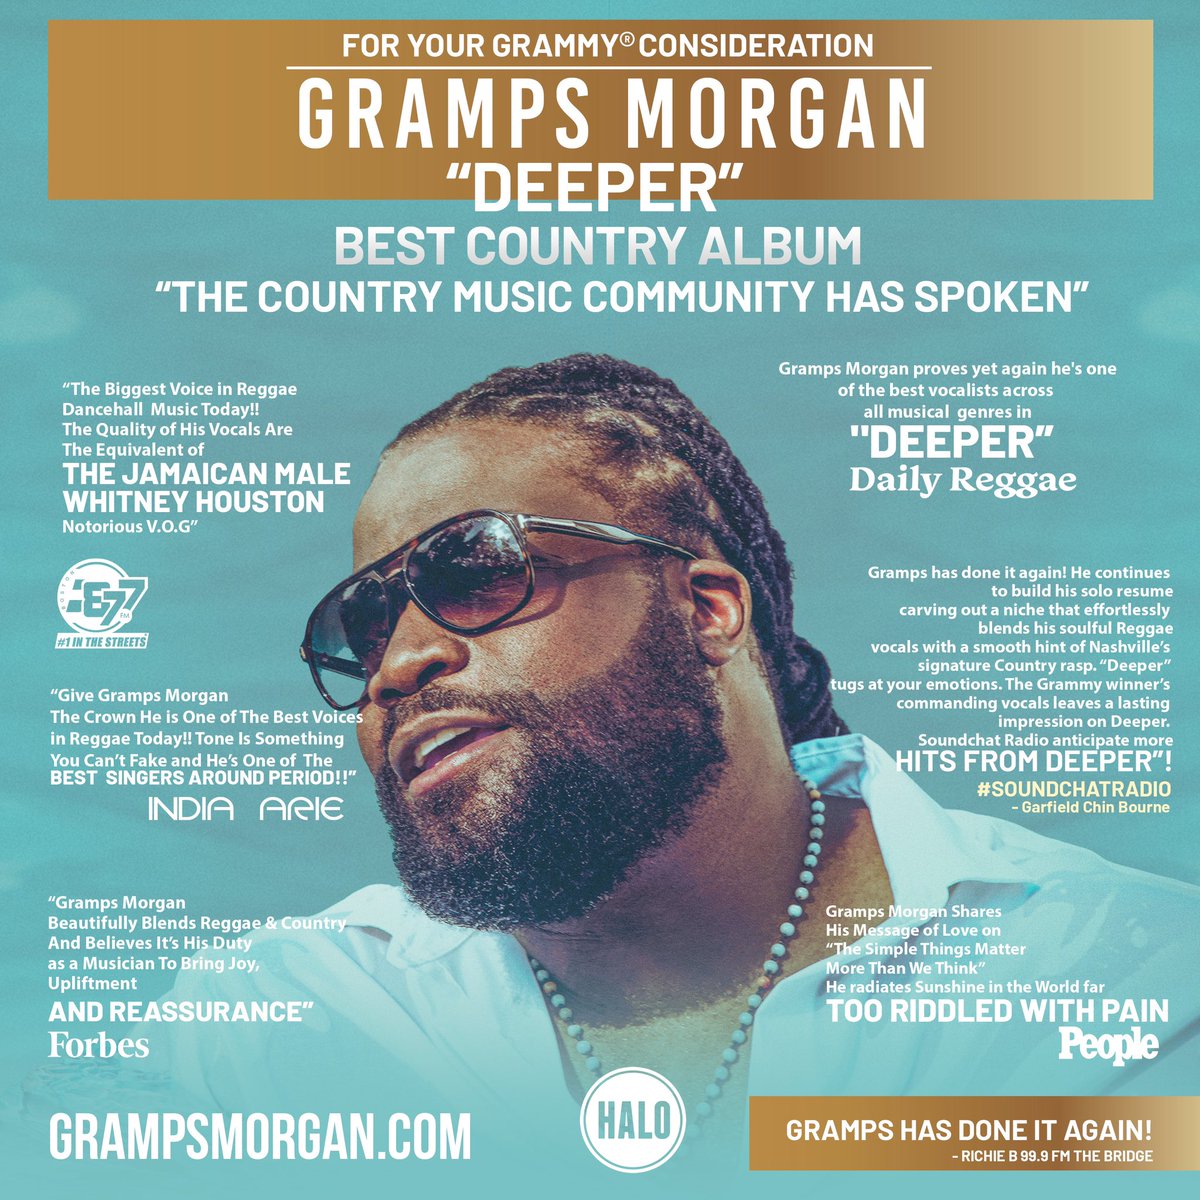 Last day to Vote for @grampsmorgan Category of Best Country Album Truly a Game Changer acoustic Albums are not easy to Pull but They Did It.. shout out to @JohnnyReid @RecordingAcad @dadasonent